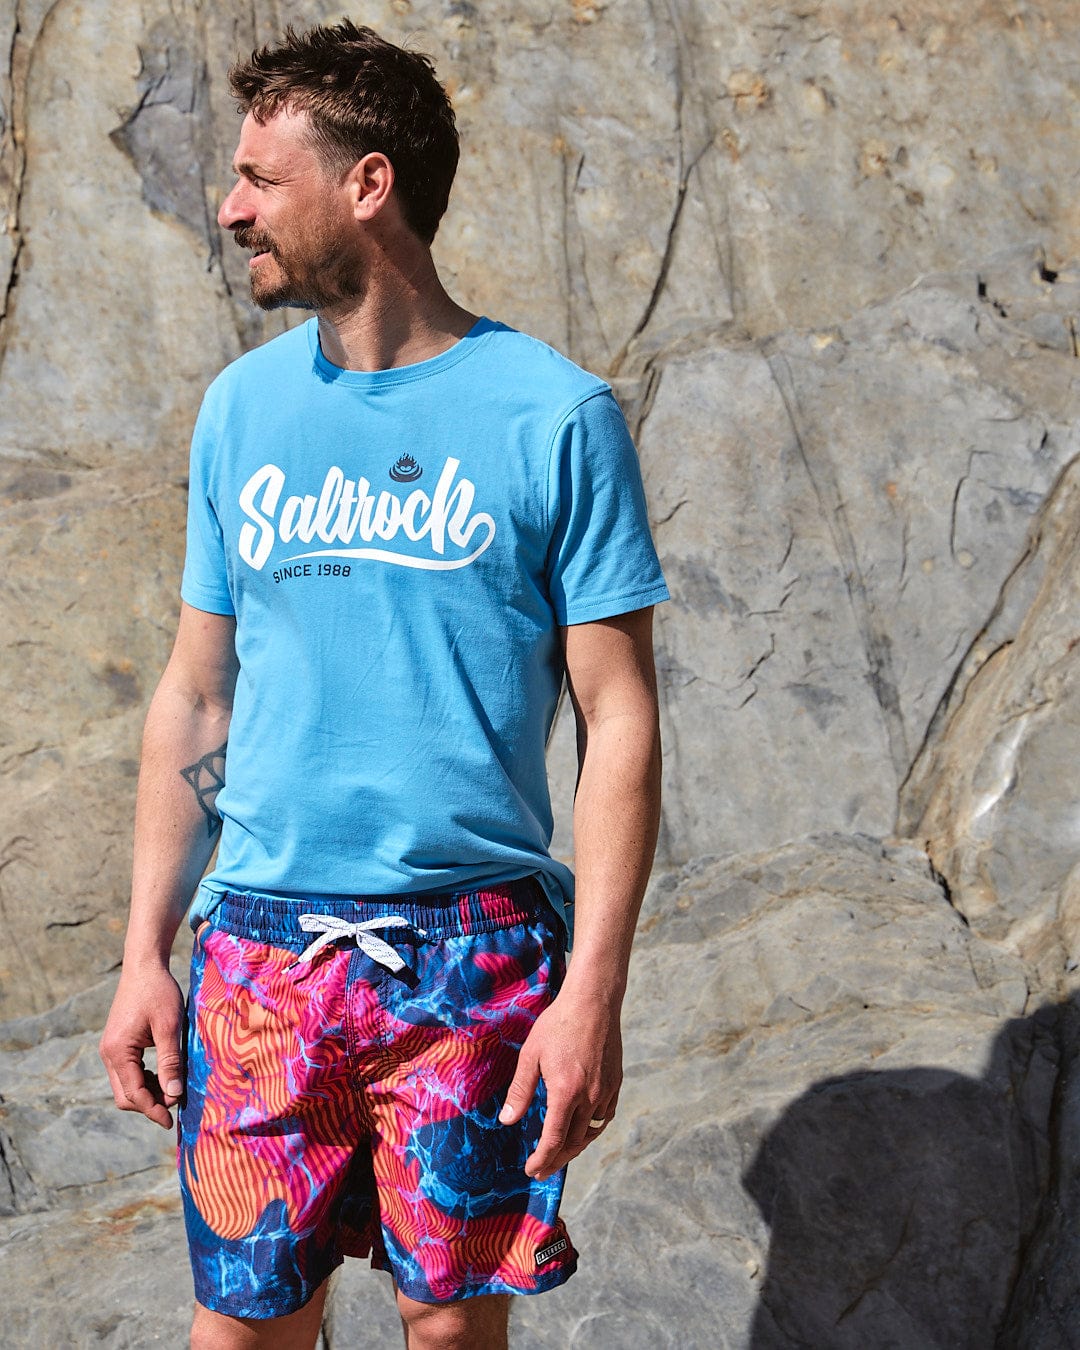 A man wearing a Saltrock Poolside - Mens All Over Print Swimshort - Teal t-shirt and floral shorts.